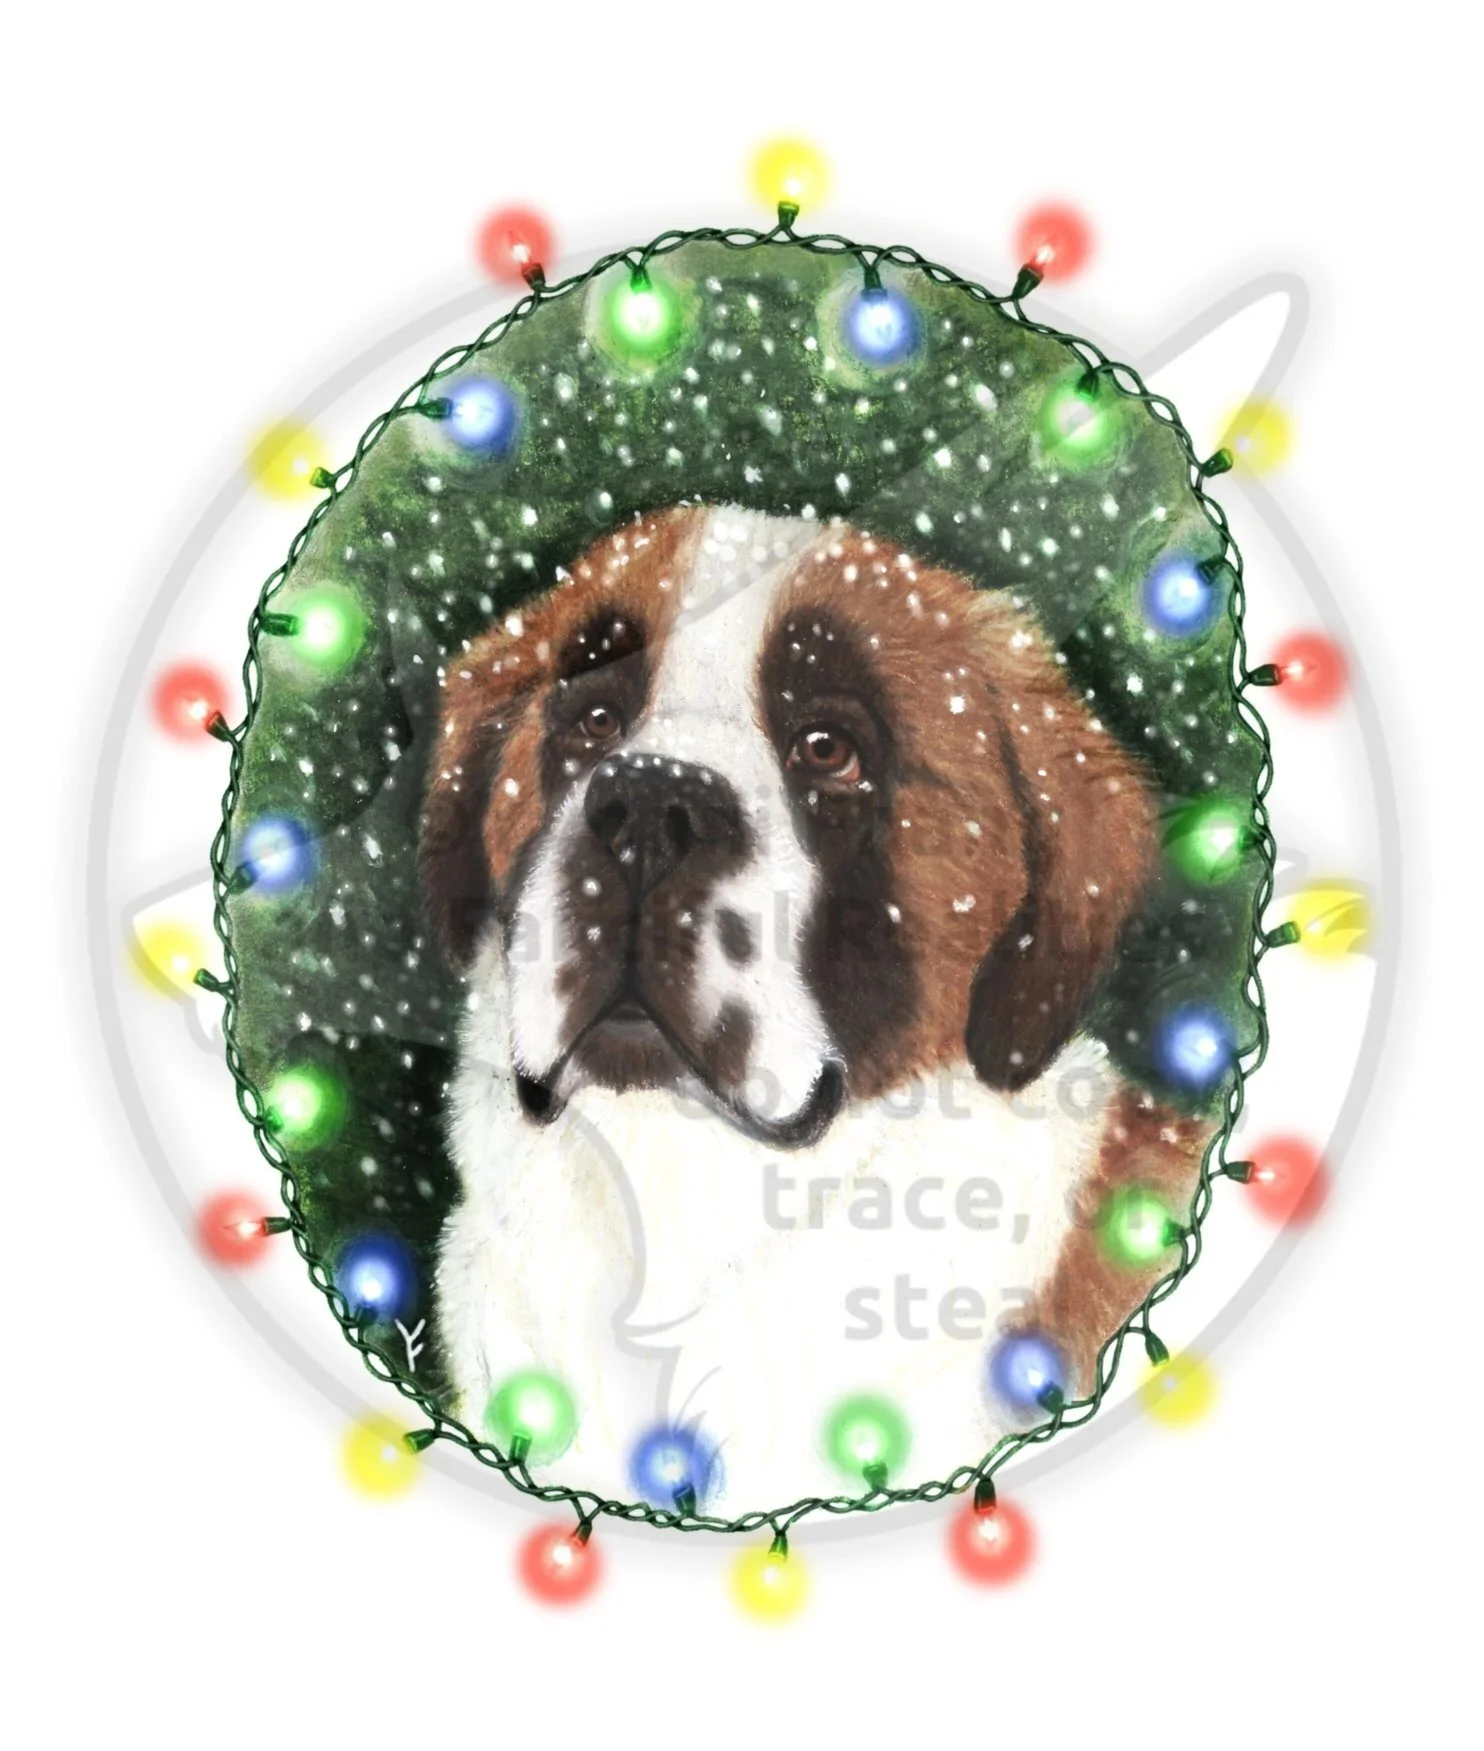 A Saint Bernard dog wreathed in snowflakes and Christmas lights.